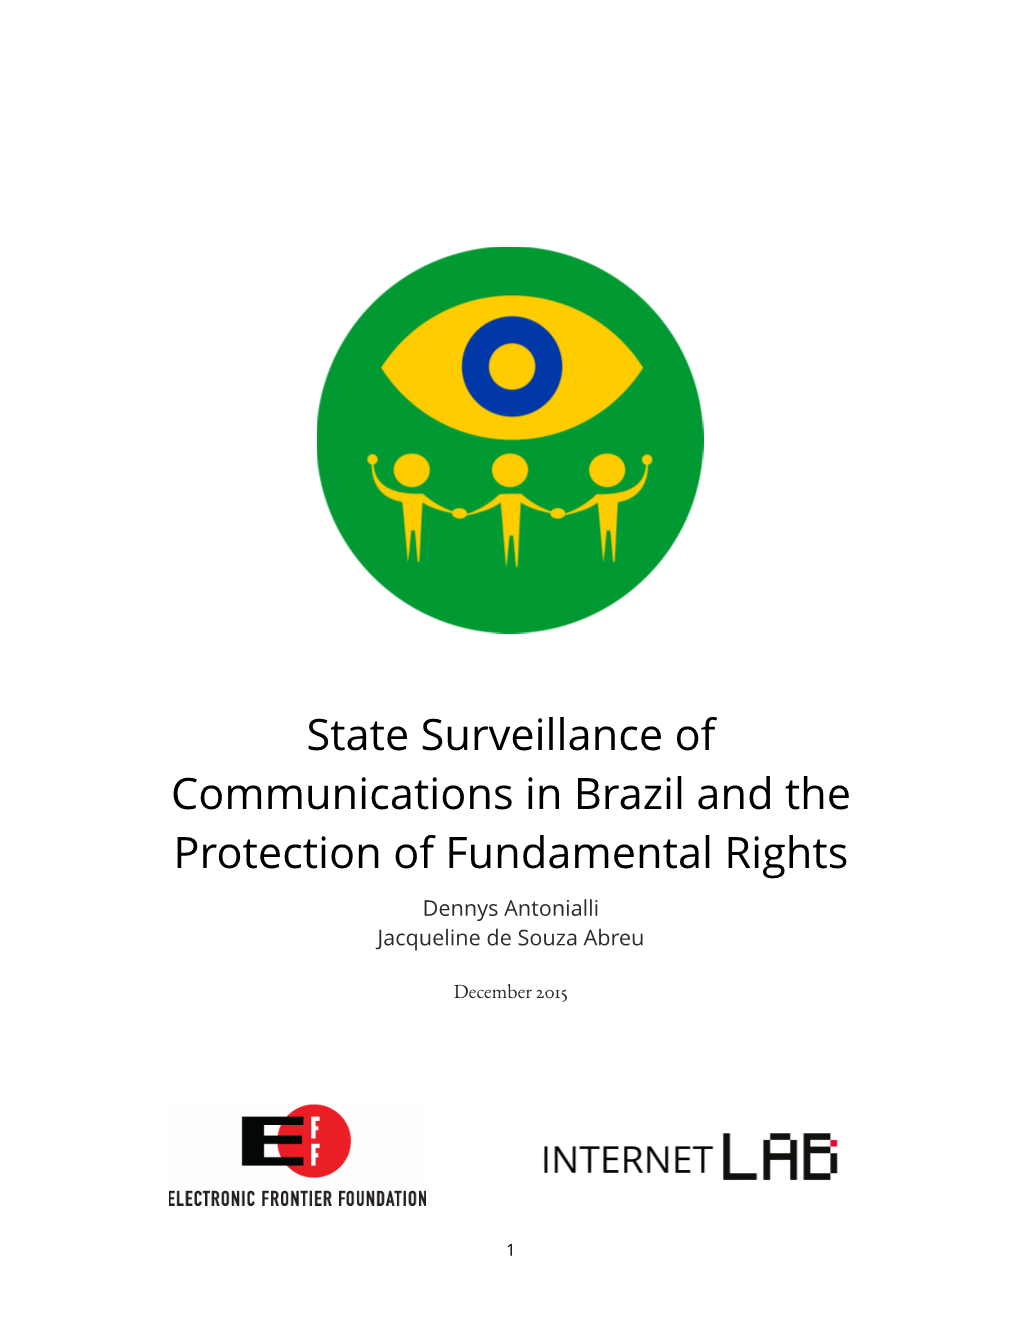 State Surveillance of Communications in Brazil and the Protection of Fundamental Rights Dennys Antonialli Jacqueline De Souza Abreu